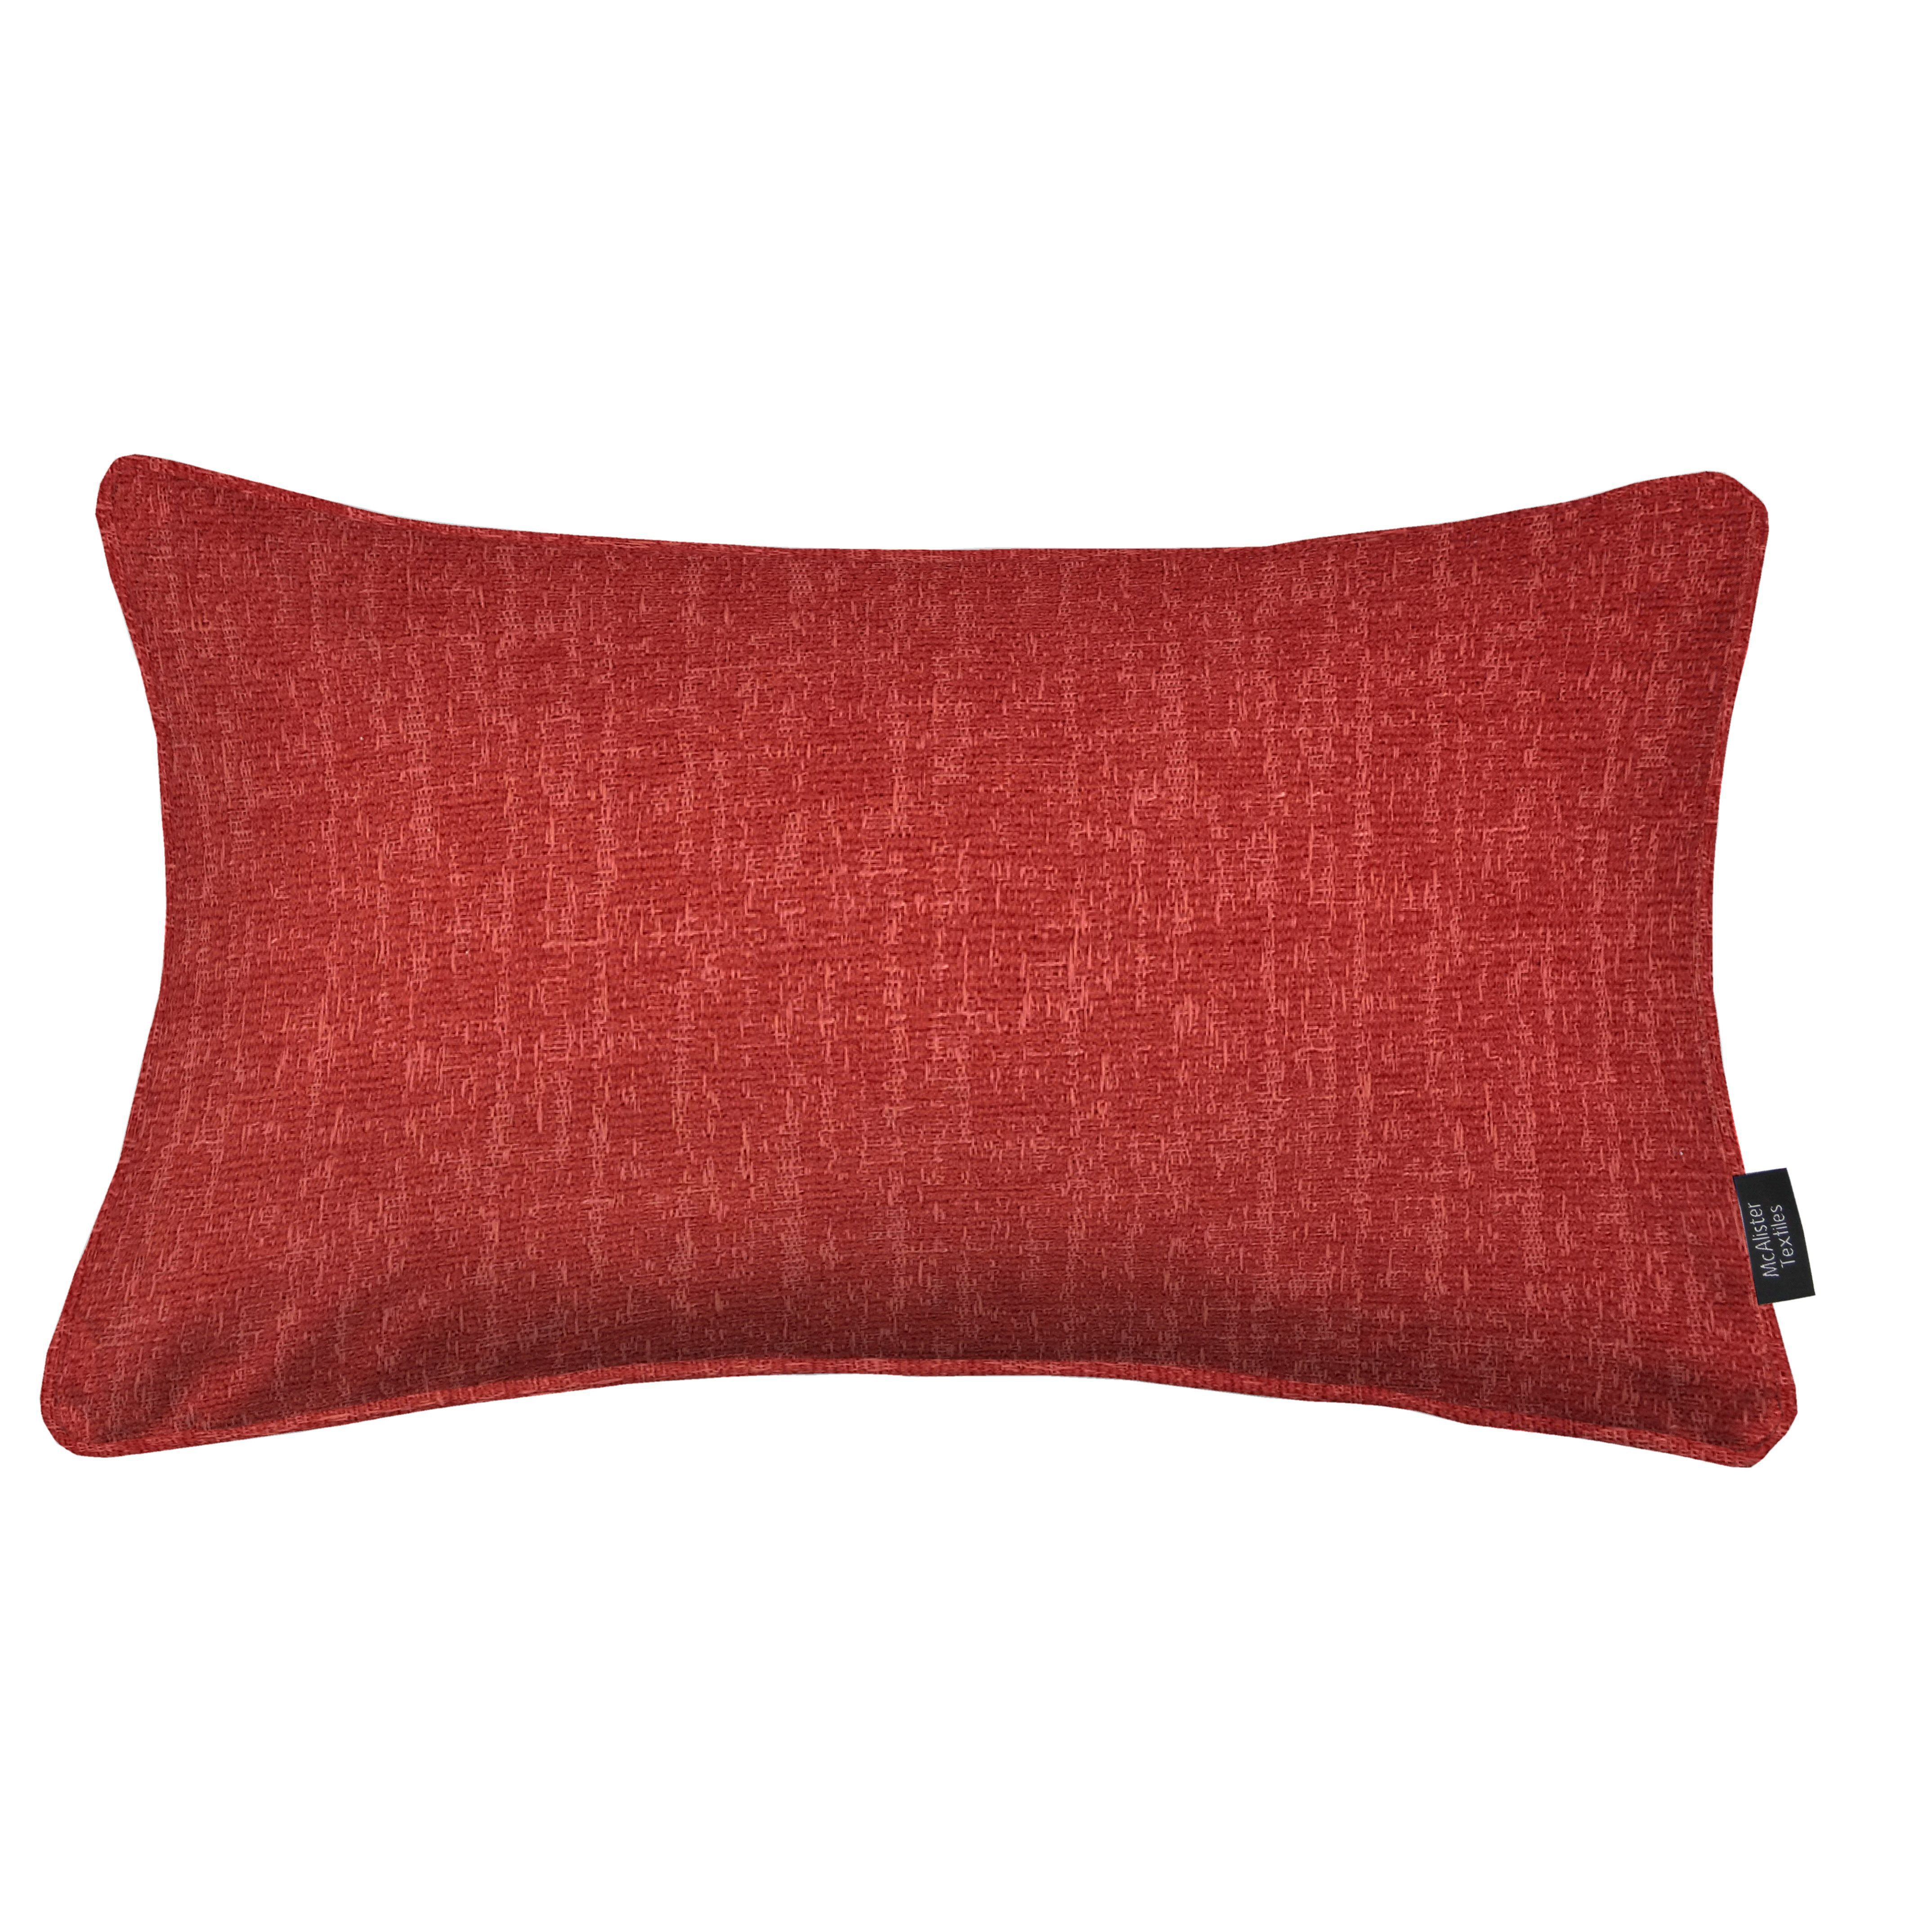 Eternity Red Chenille Pillow, Cover Only / 50cm x 30cm